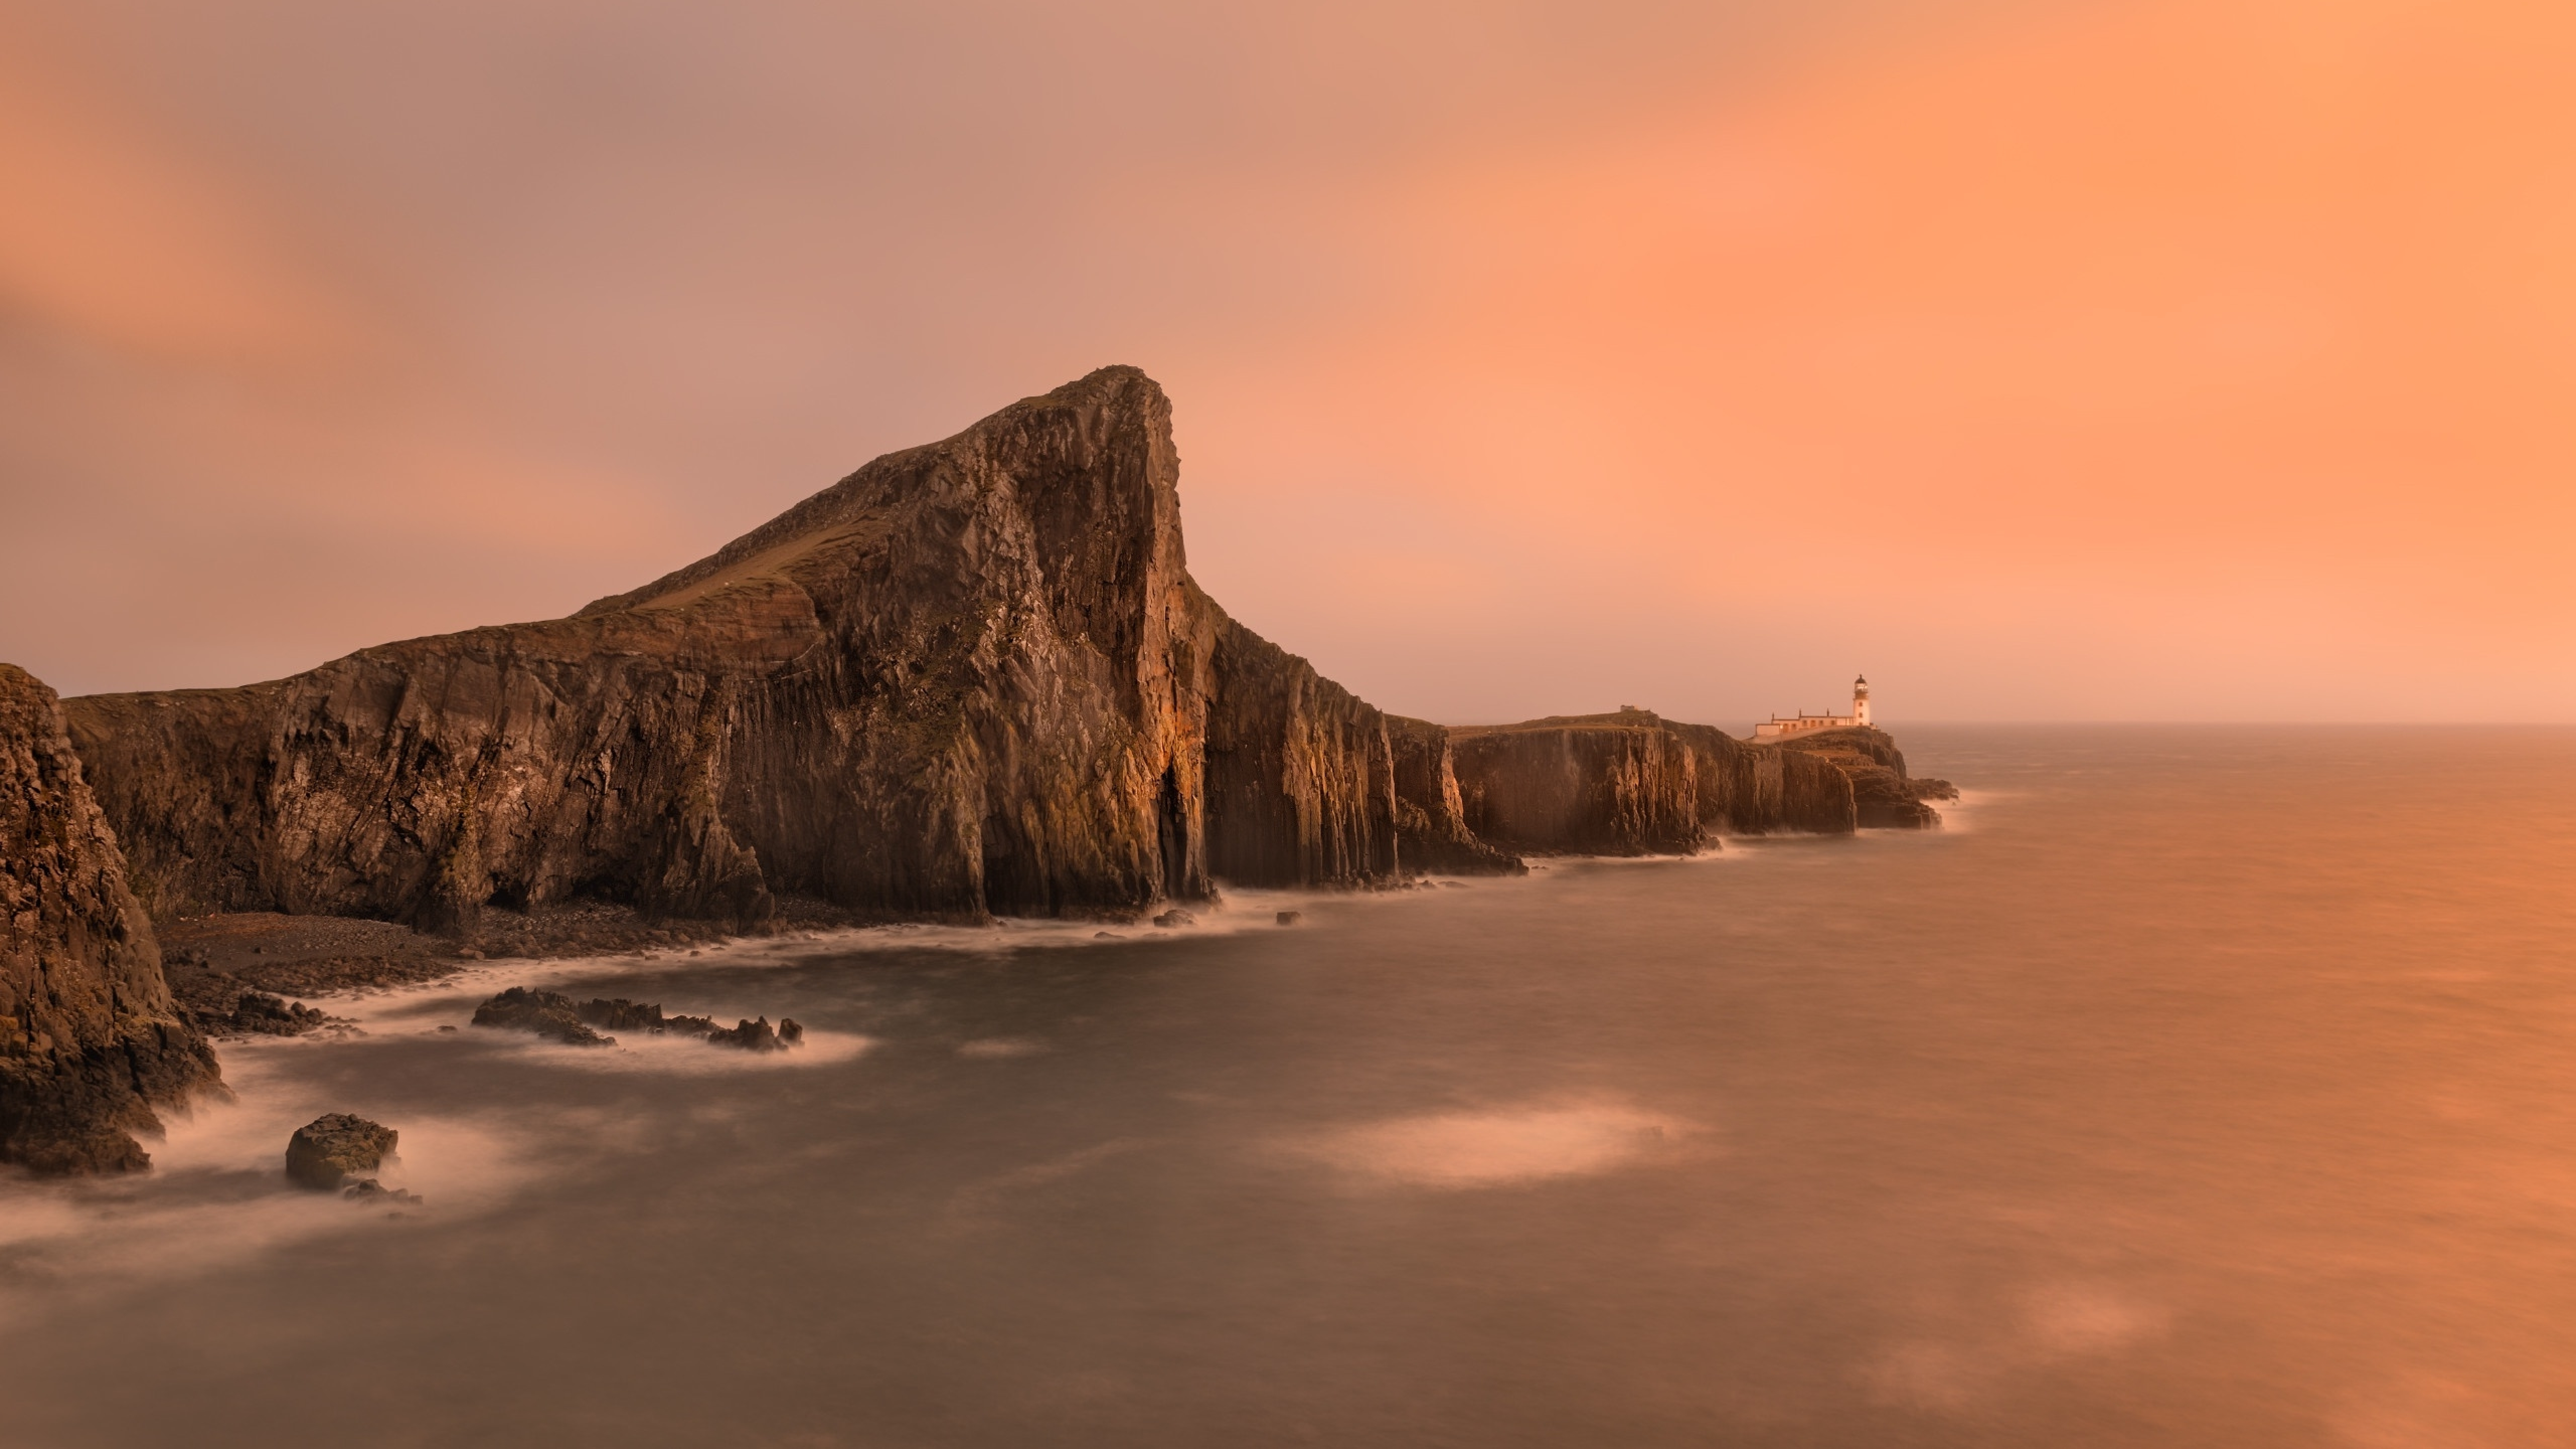 7680x4320 Skye United Kingdom 8k 8k HD 4k Wallpapers, Images, Backgrounds,  Photos and Pictures